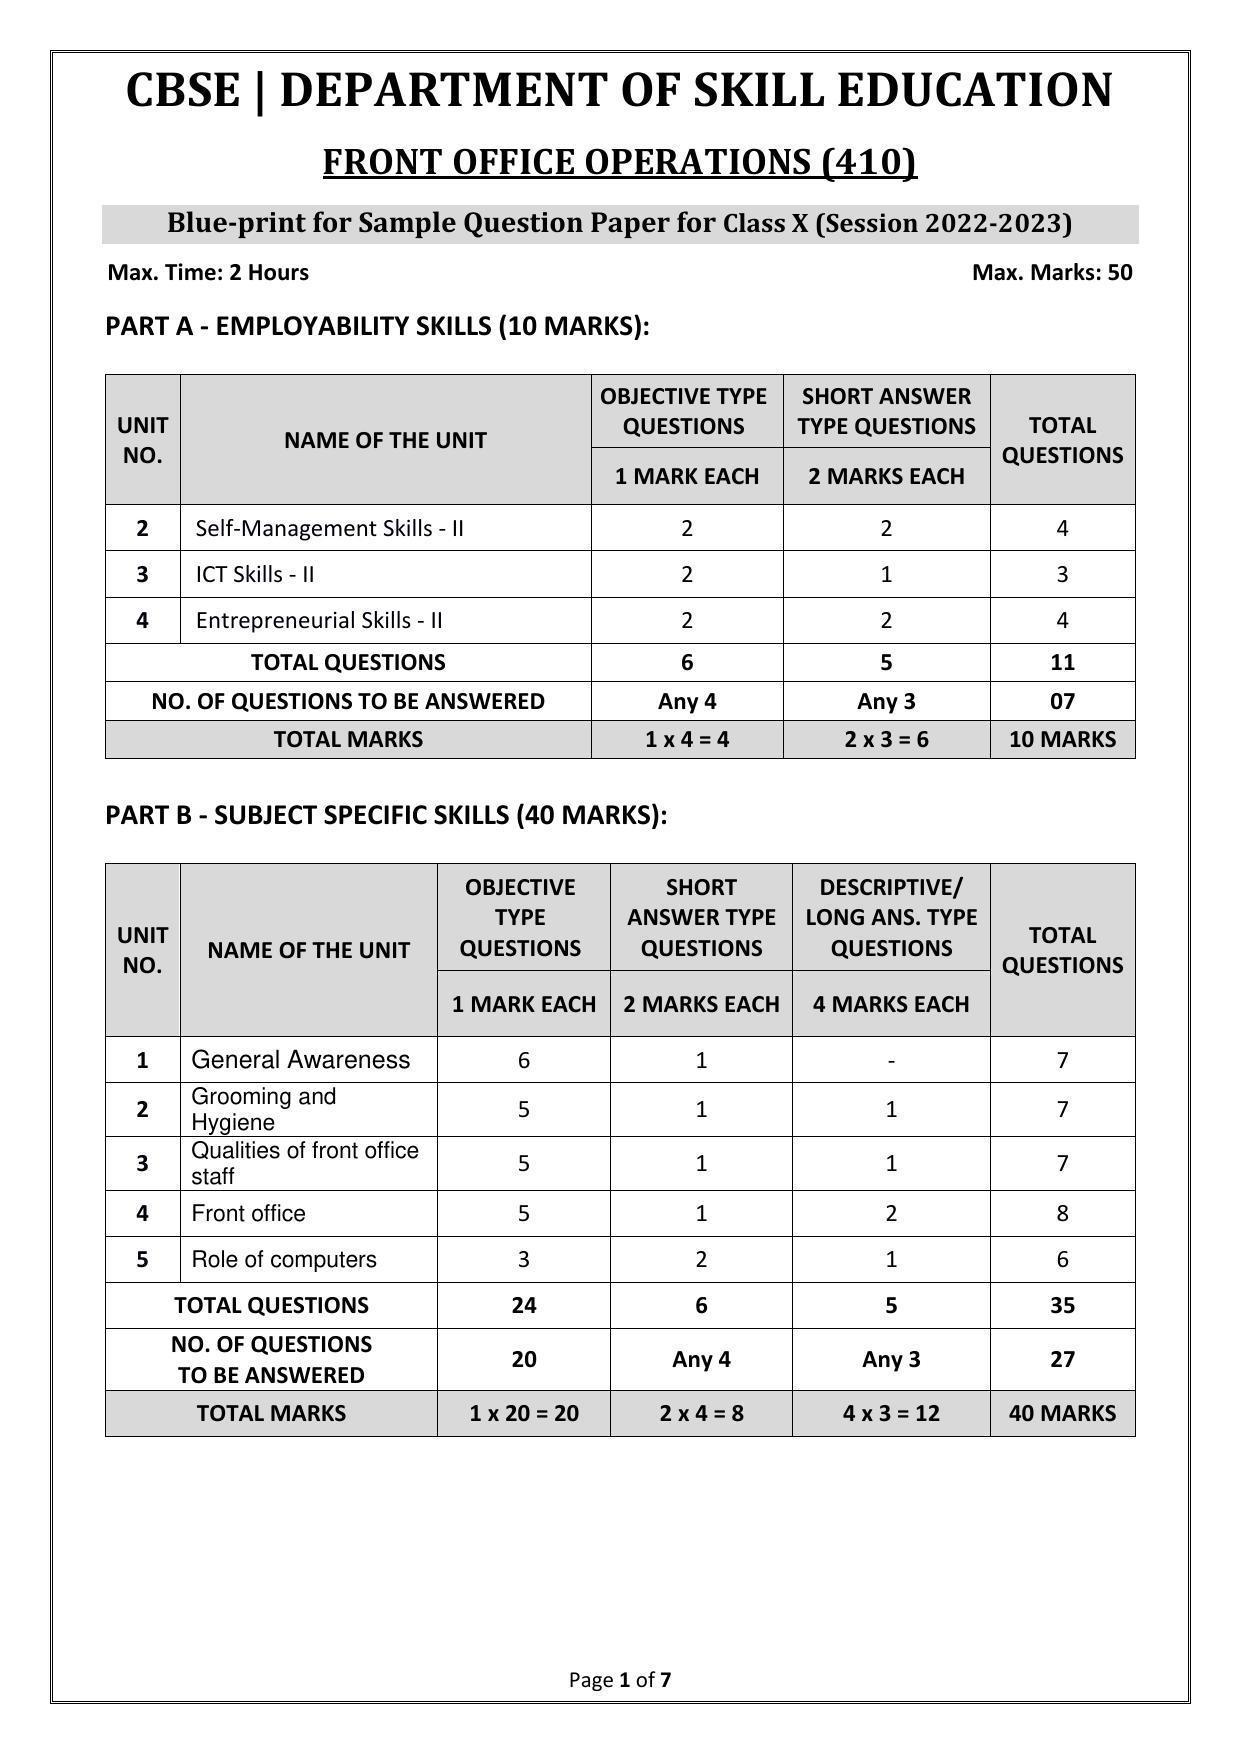 CBSE Class 10 (Skill Education) Front Office Operations Sample Papers 2023 - Page 1